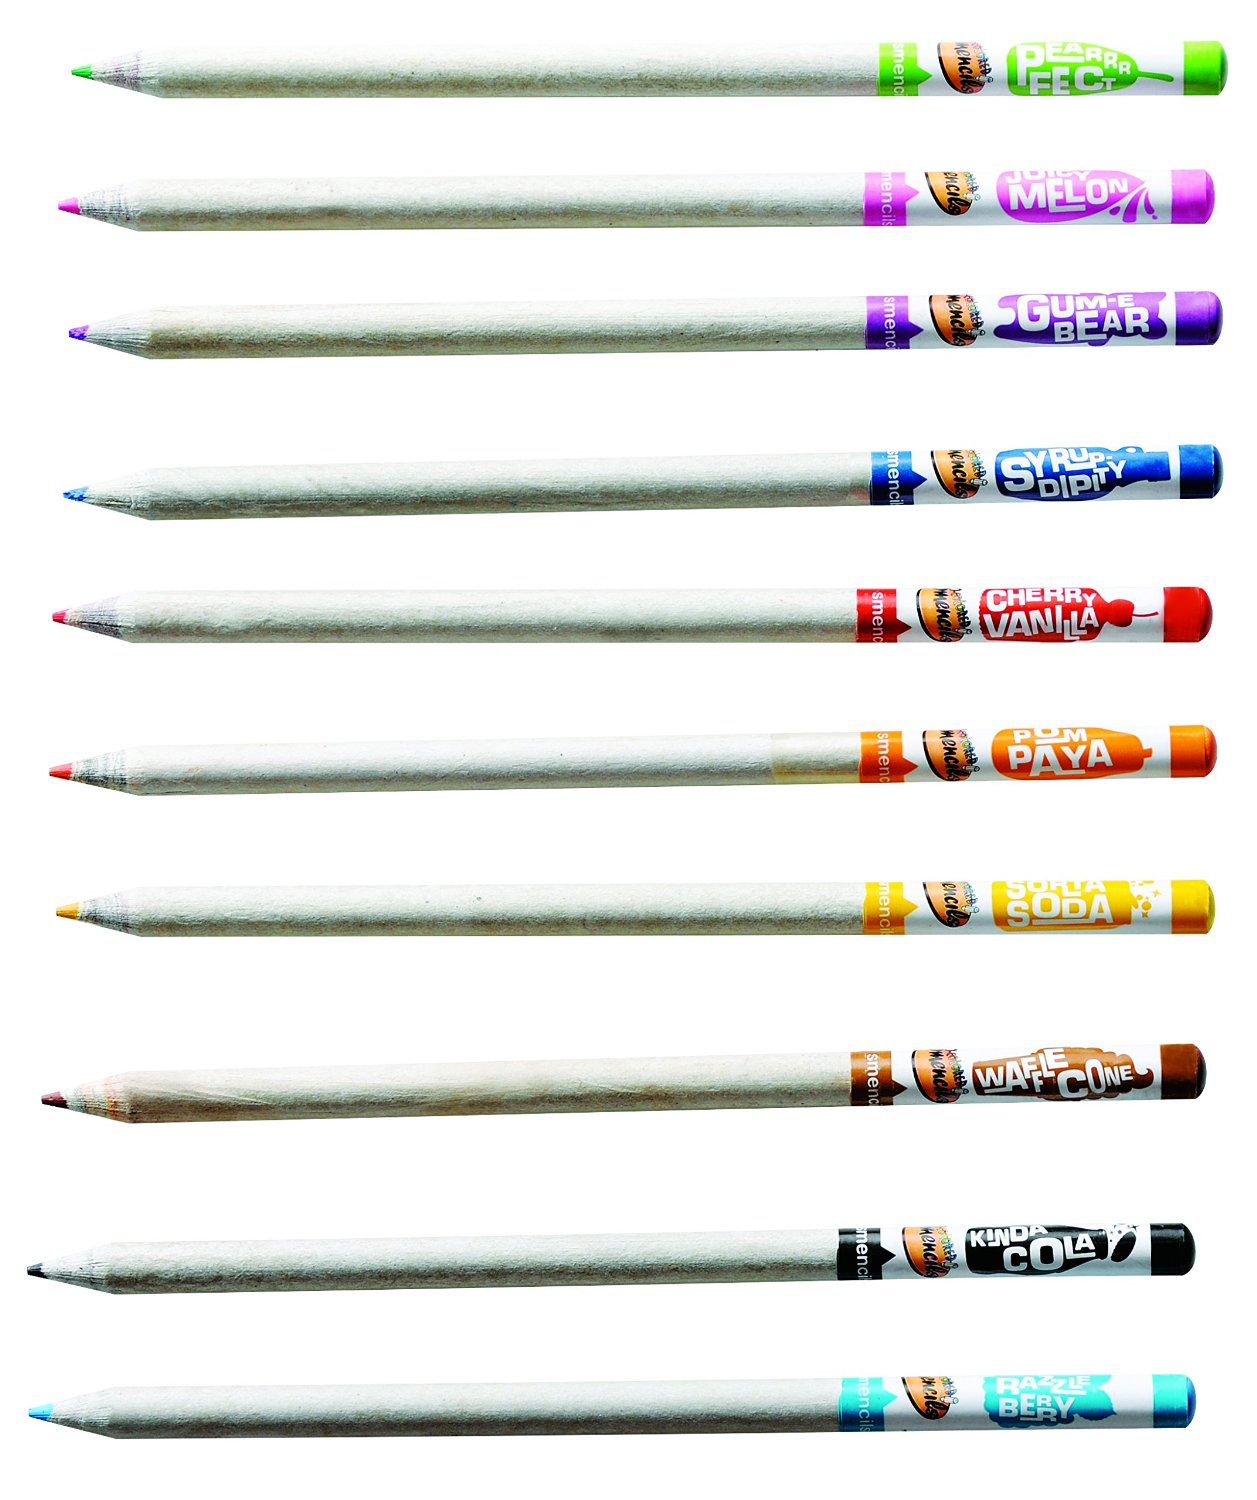 Smencils colored pencils that smell good